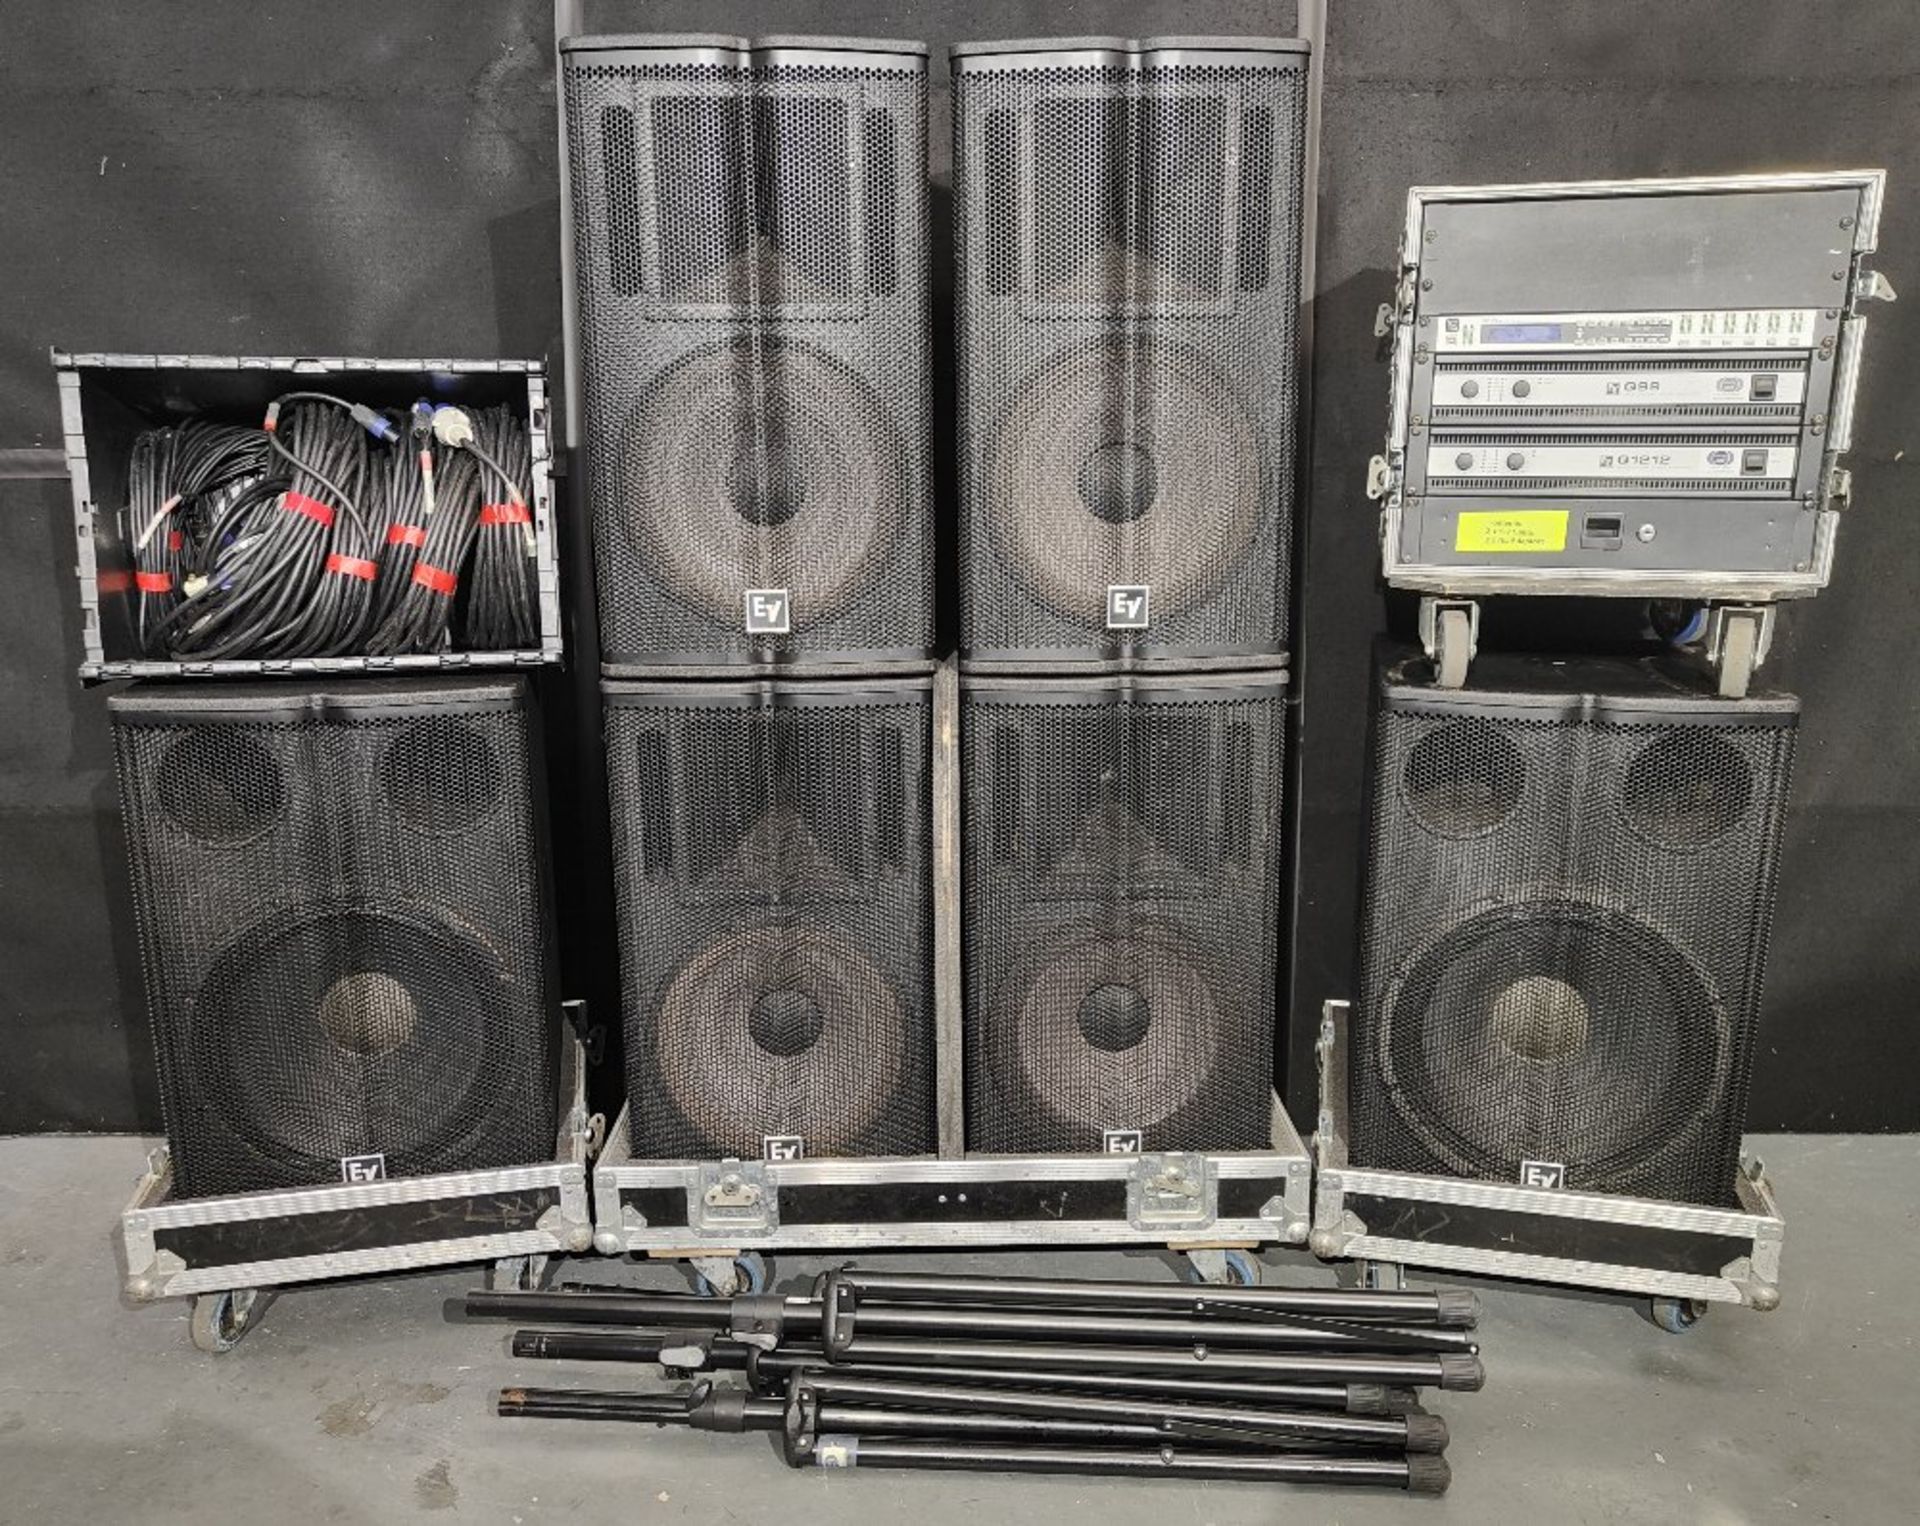 Electro-Voice PA Sound System - (4) TX1152 Speakers, (2) TX1181 Subs & Associated Equipment - Image 2 of 14